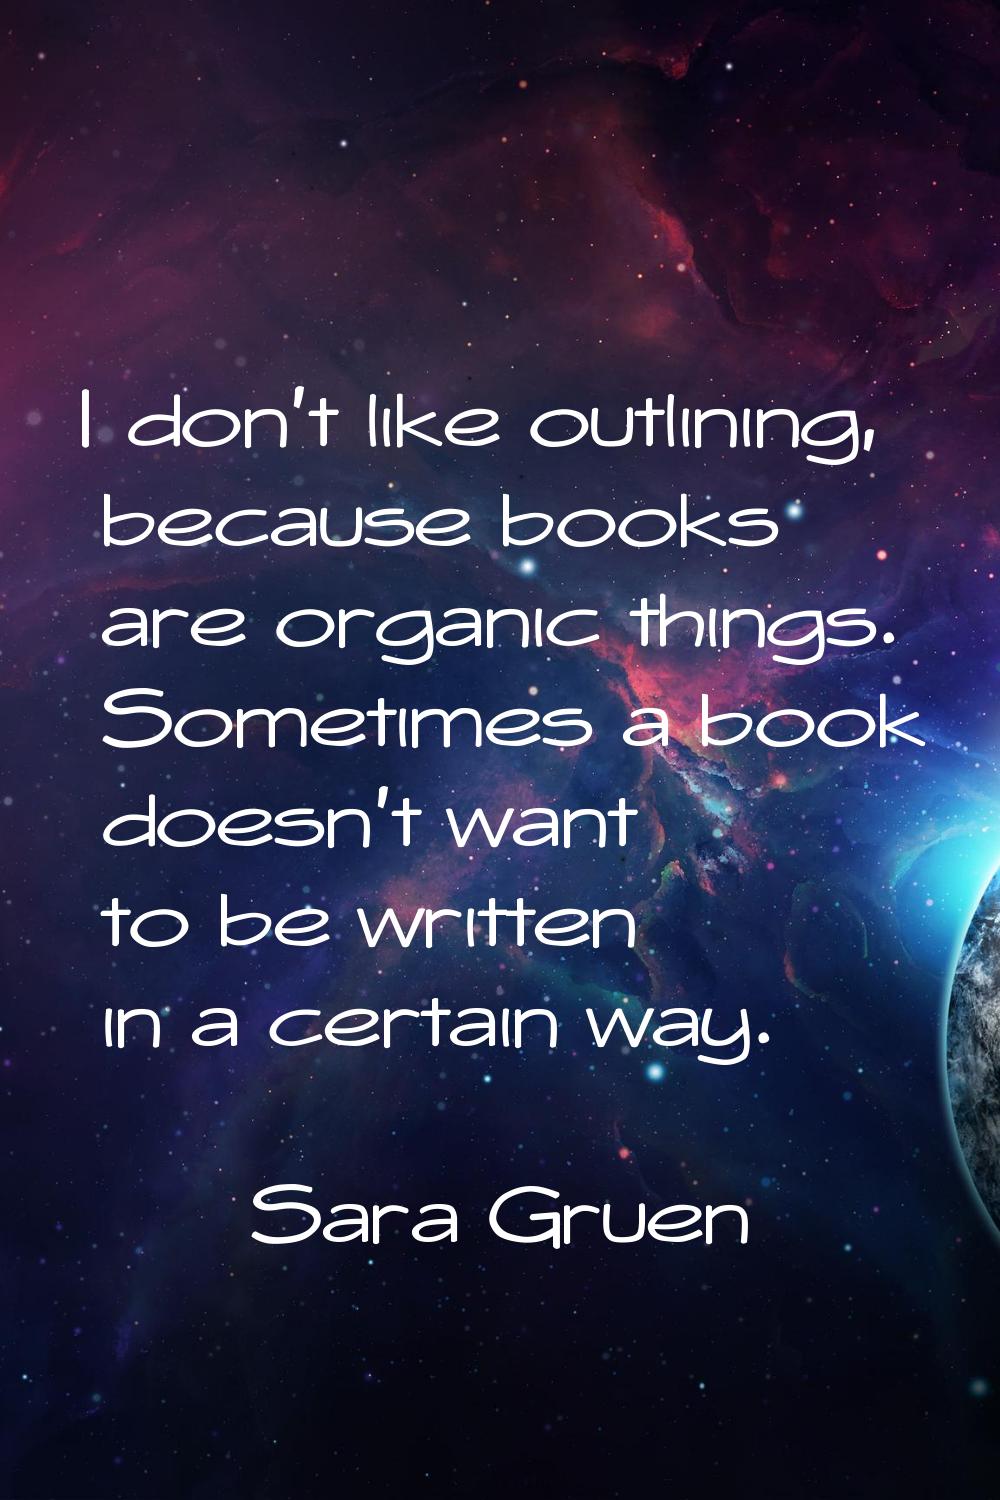 I don't like outlining, because books are organic things. Sometimes a book doesn't want to be writt